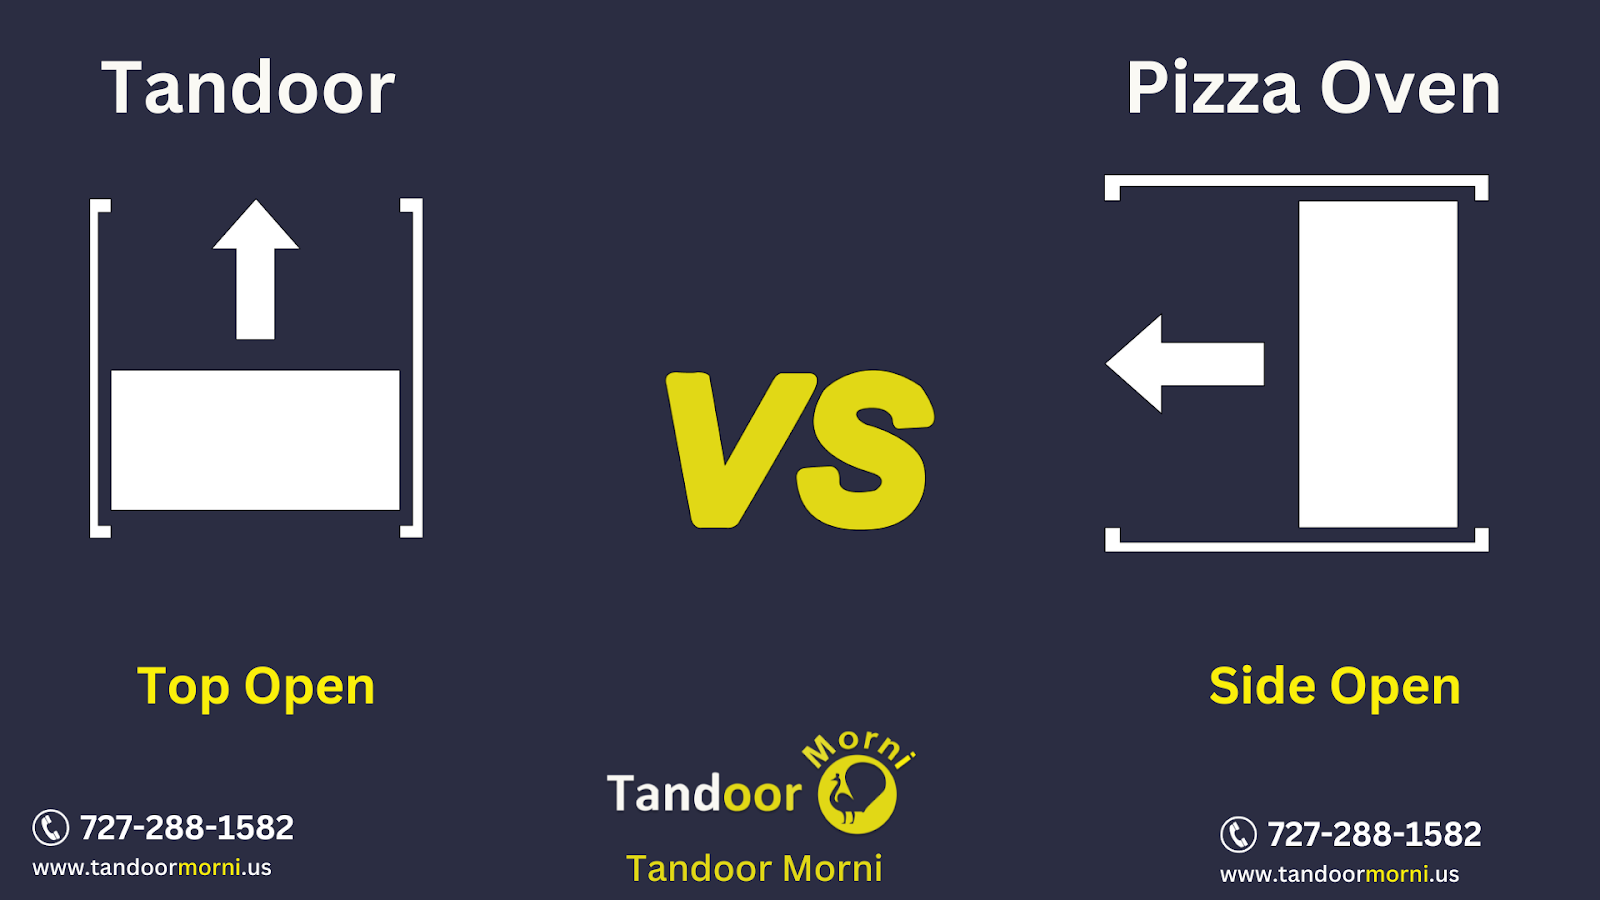 There is another distinction between a pizza oven vs tandoor: the pizza oven inserts the pizza from the side, but the tandoor has its top open for inserting chicken tikka, paneer, fish, shrimp, and kebabs.